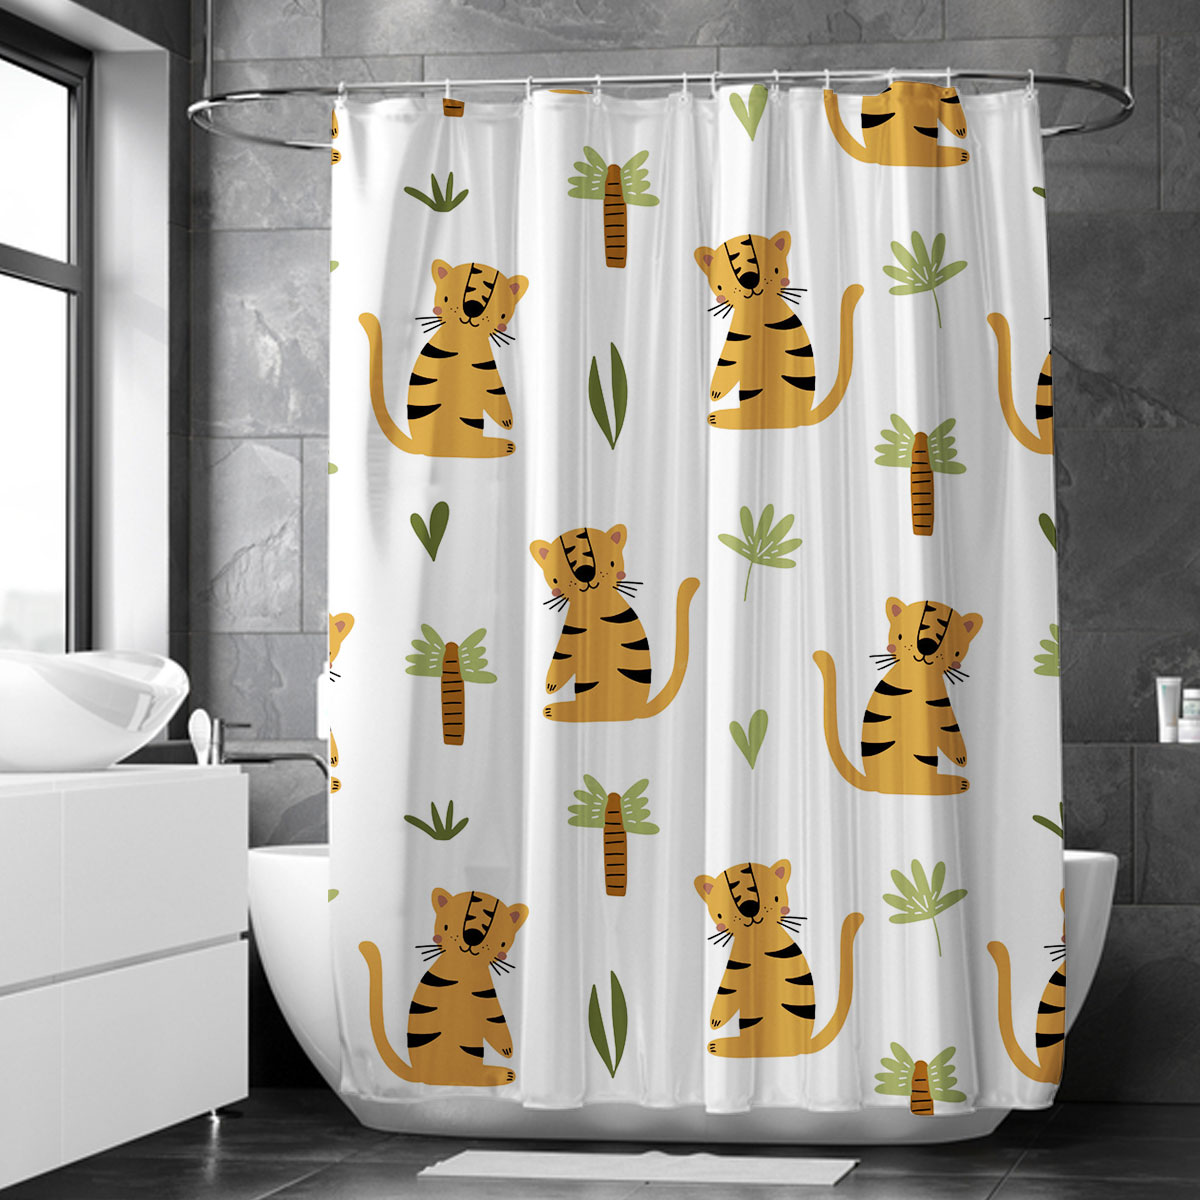 Cartoon Tiger And Tree Shower Curtain 6